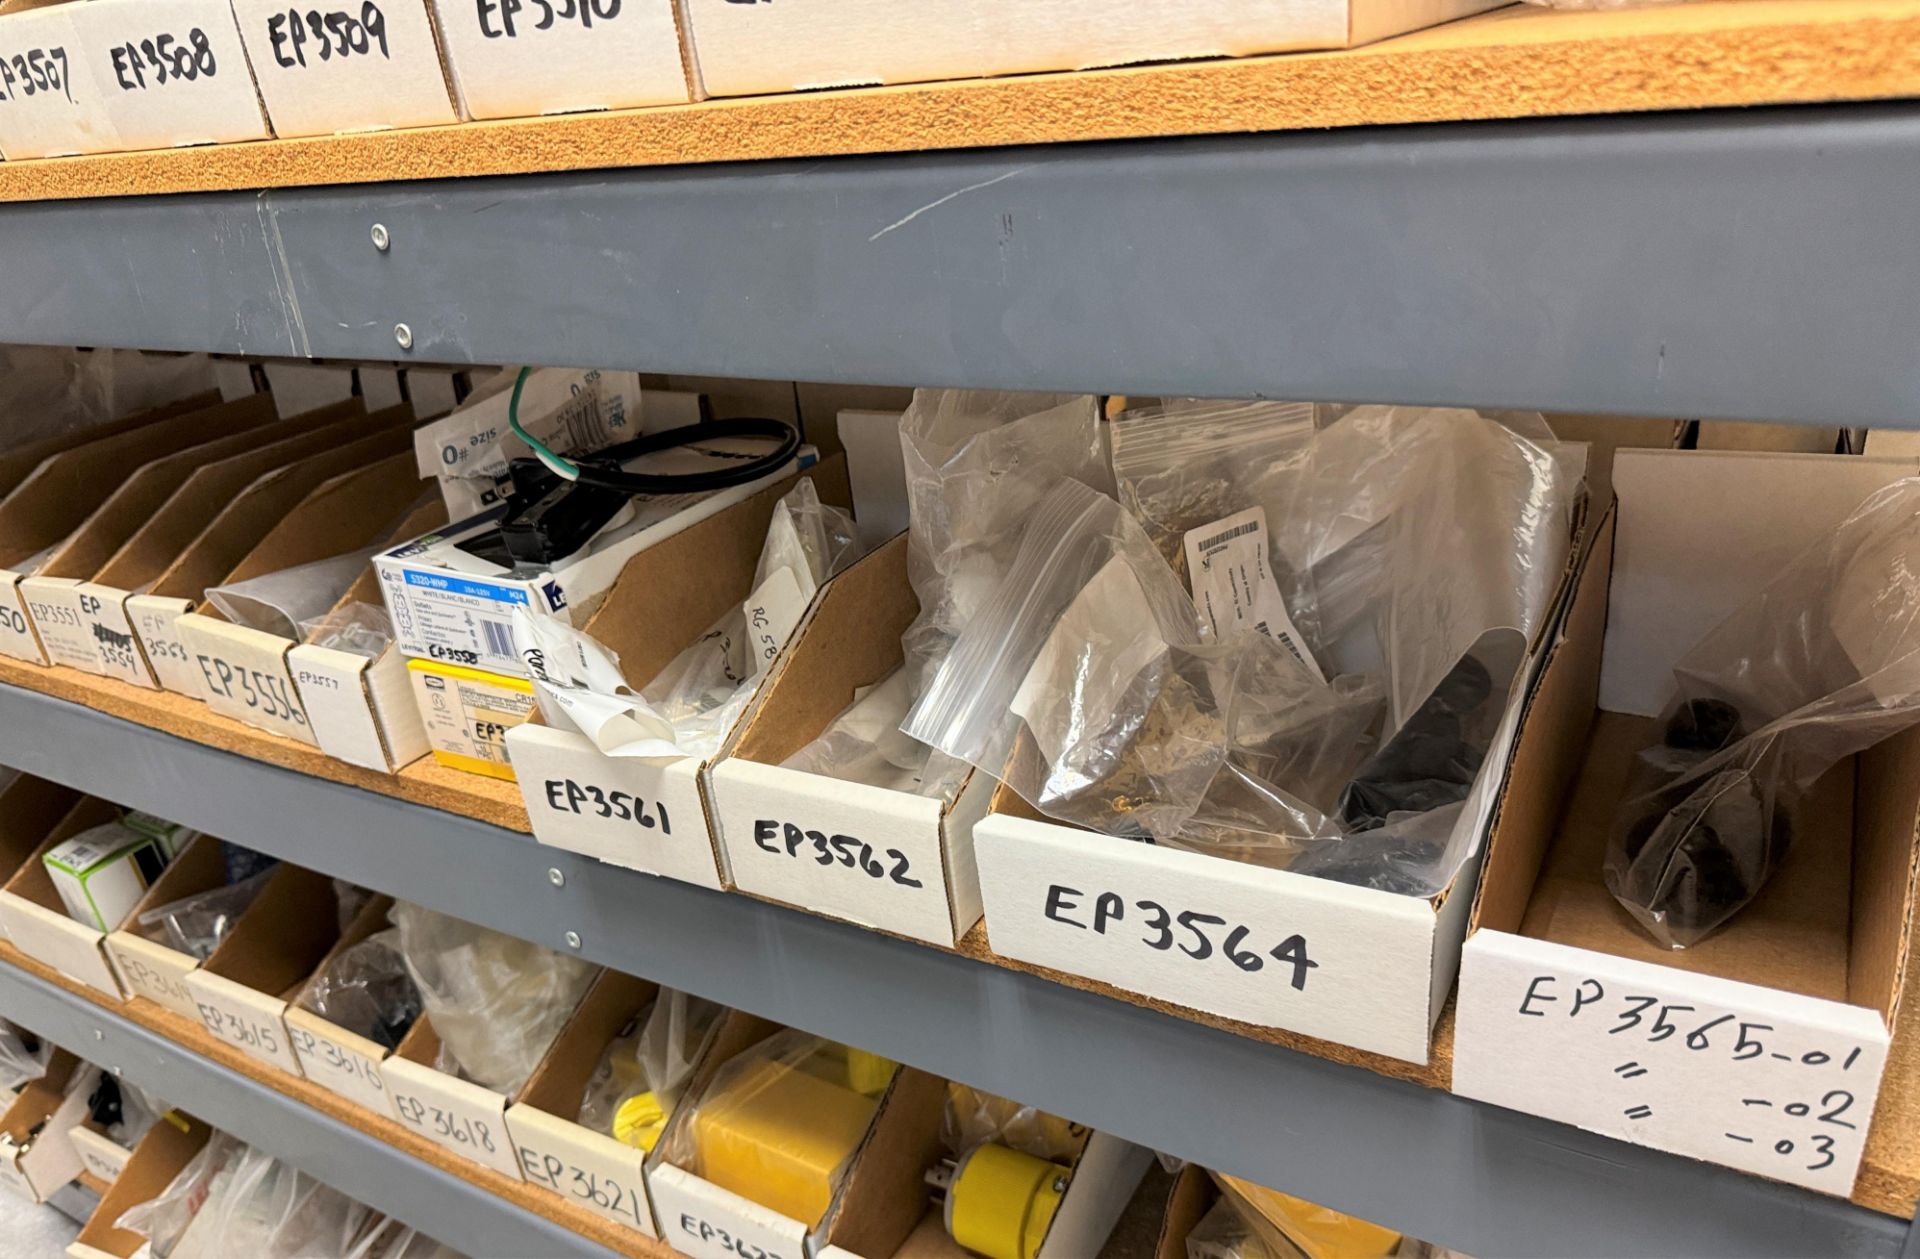 LOT - CONTENTS ONLY OF (1) SHELF, TO INCLUDE: CONNECTORS, COAXIAL CONNECTORS, PIN PLUGS, ETC.